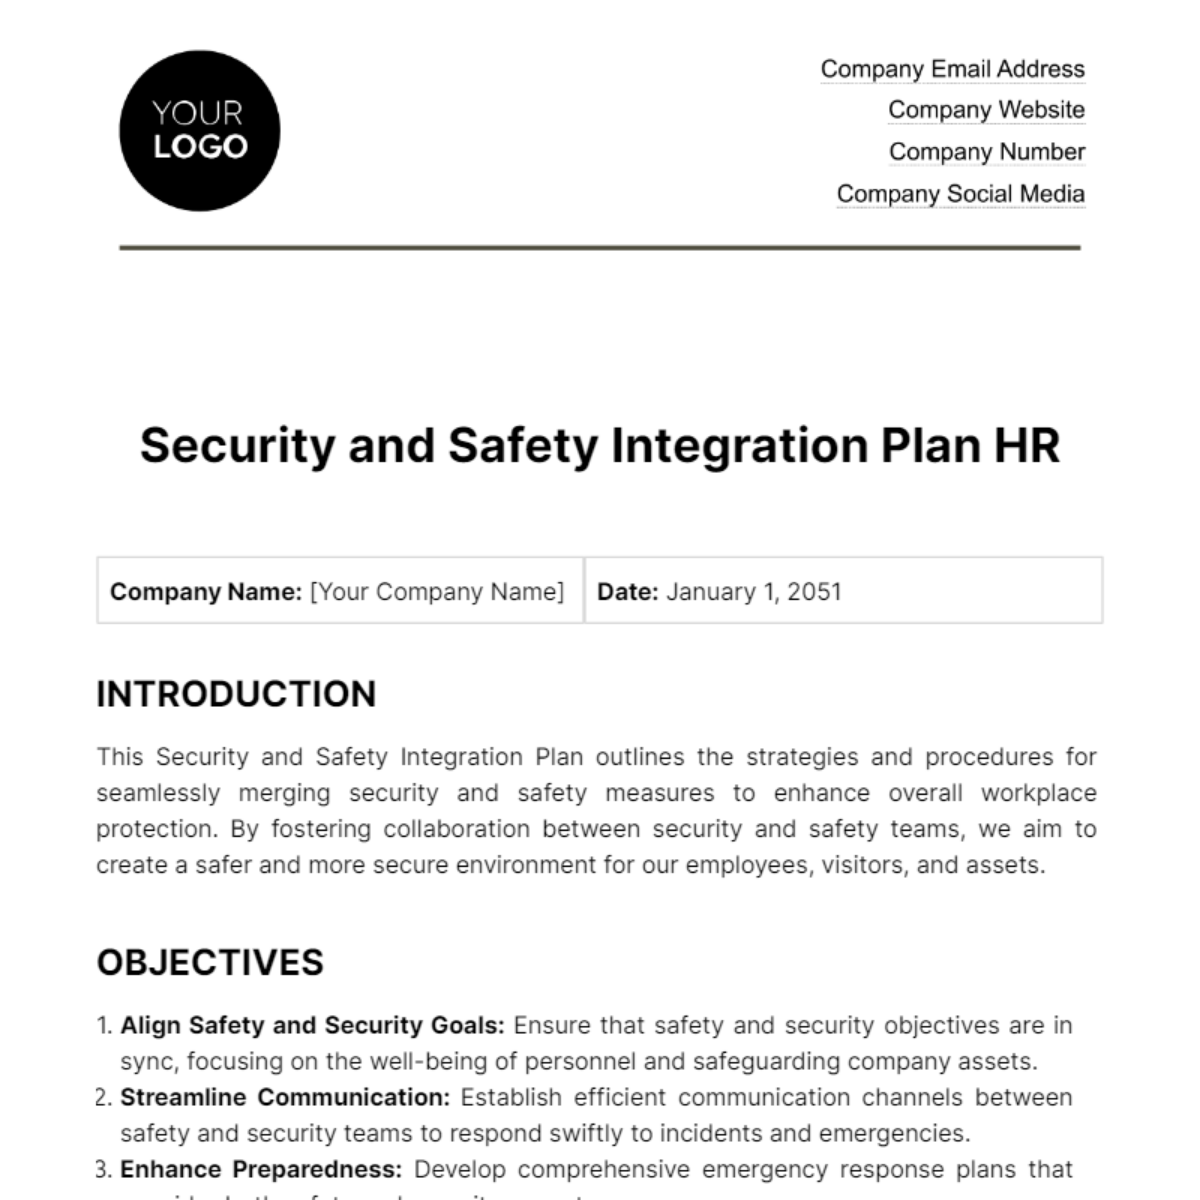 Free Security and Safety Integration Plan HR Template